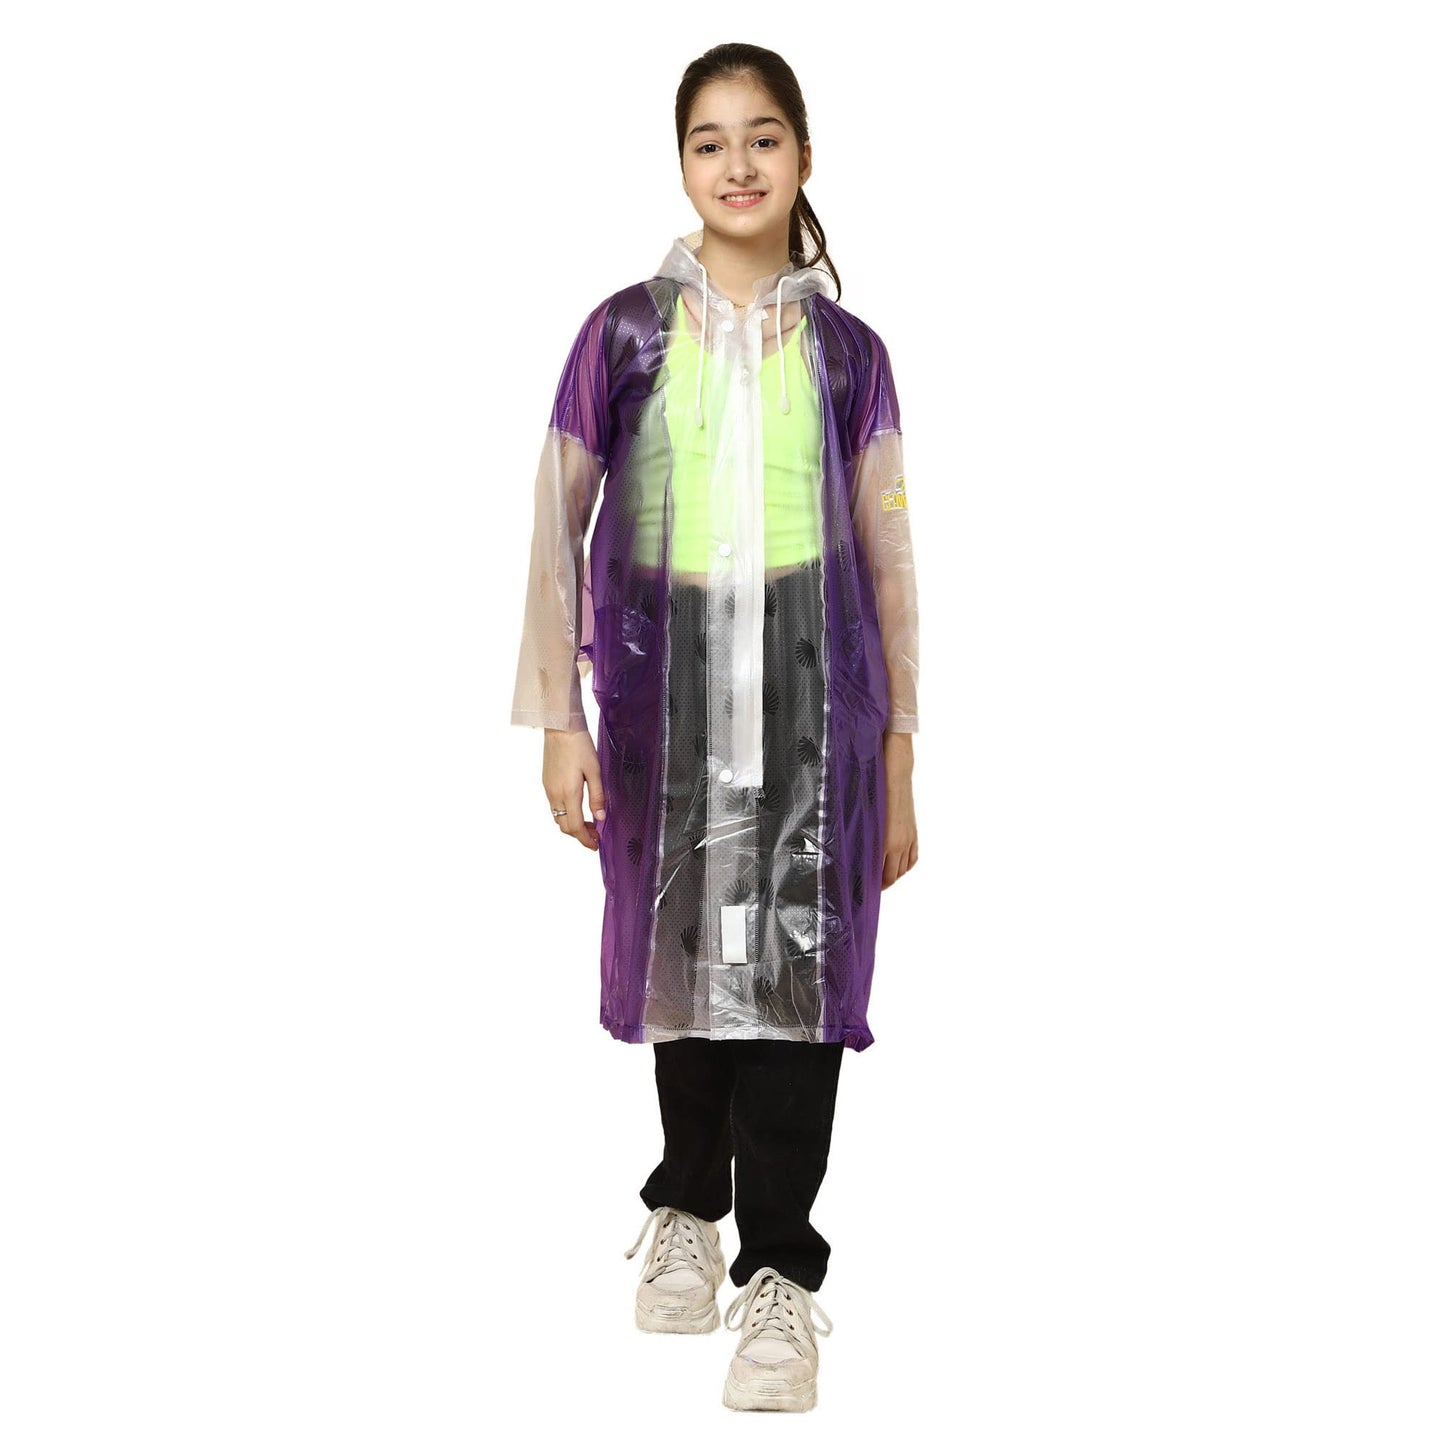 THE CLOWNFISH Simpson Series Kids Waterproof PVC Longcoat with Adjustable Hood & Extra Space for Backpack/Schoolbag Holding. Printed Plastic Pouch. Kid Age-4-5 years (Size-27-Purple)